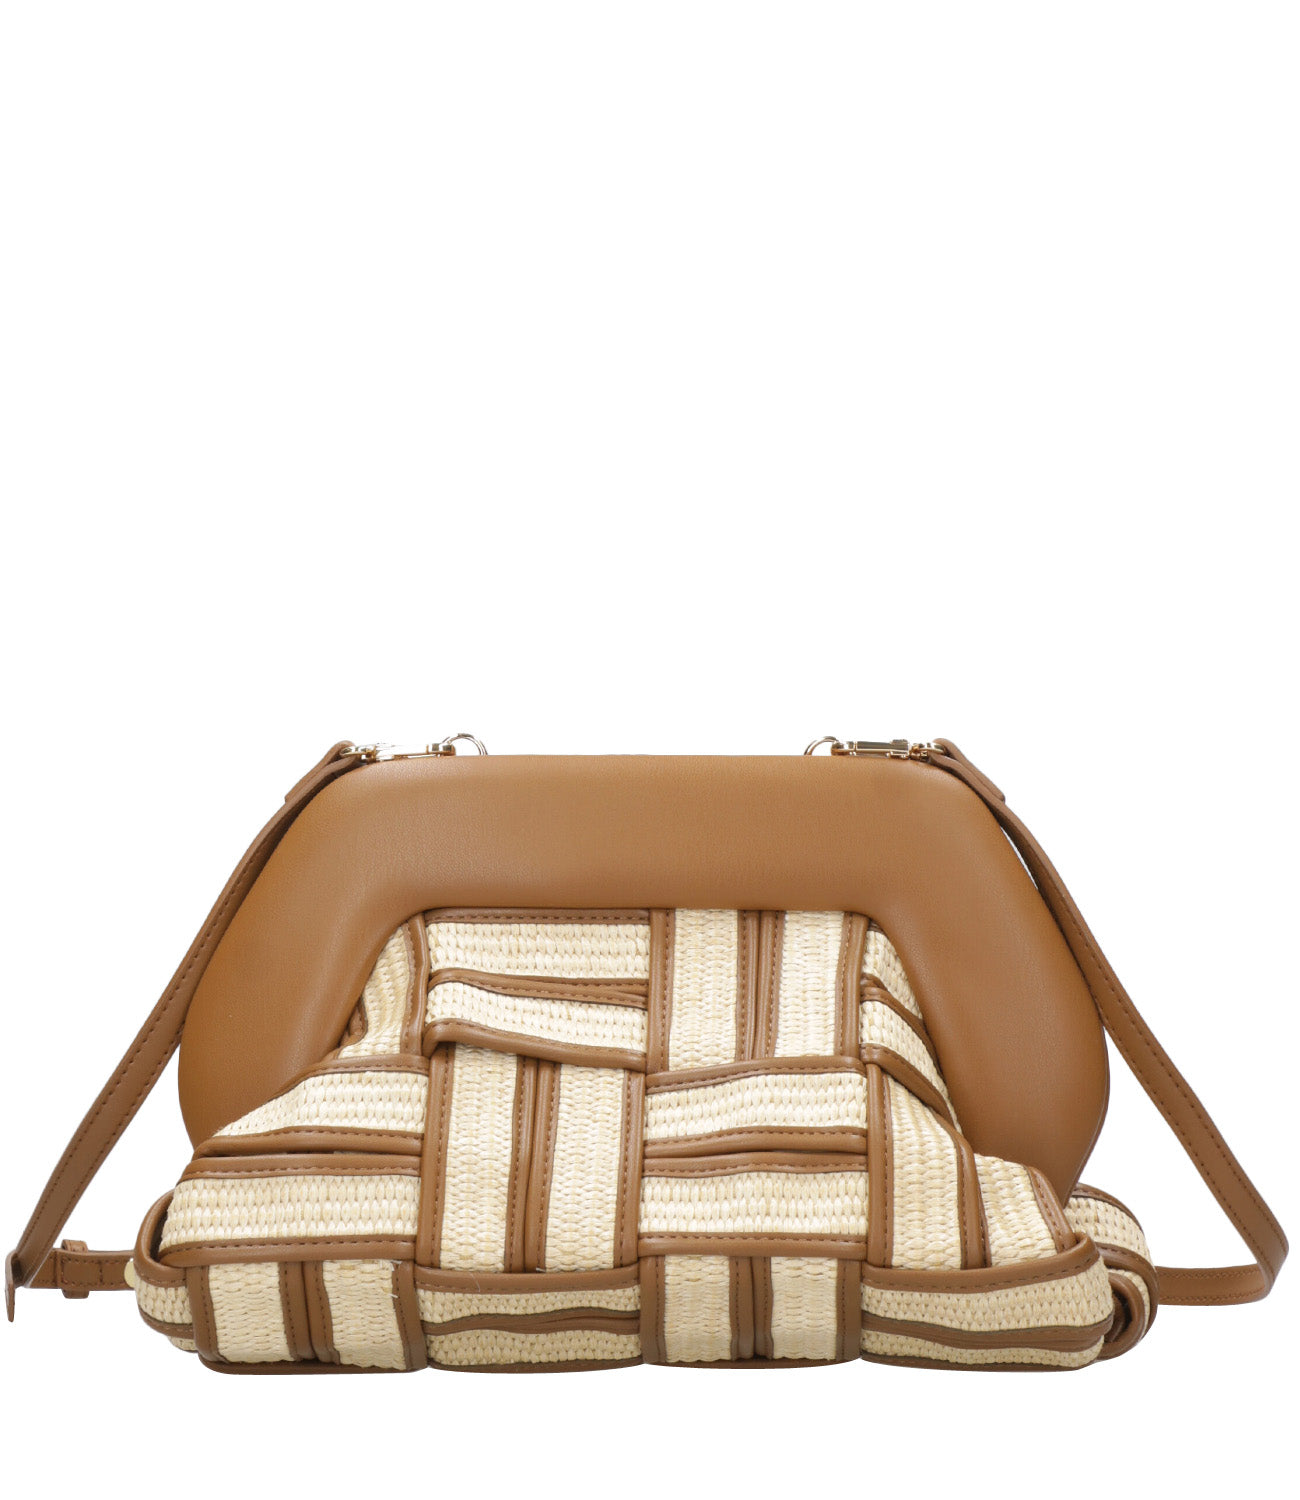 Themoiré | Tia Weaved Straw Bag Beige and Camel